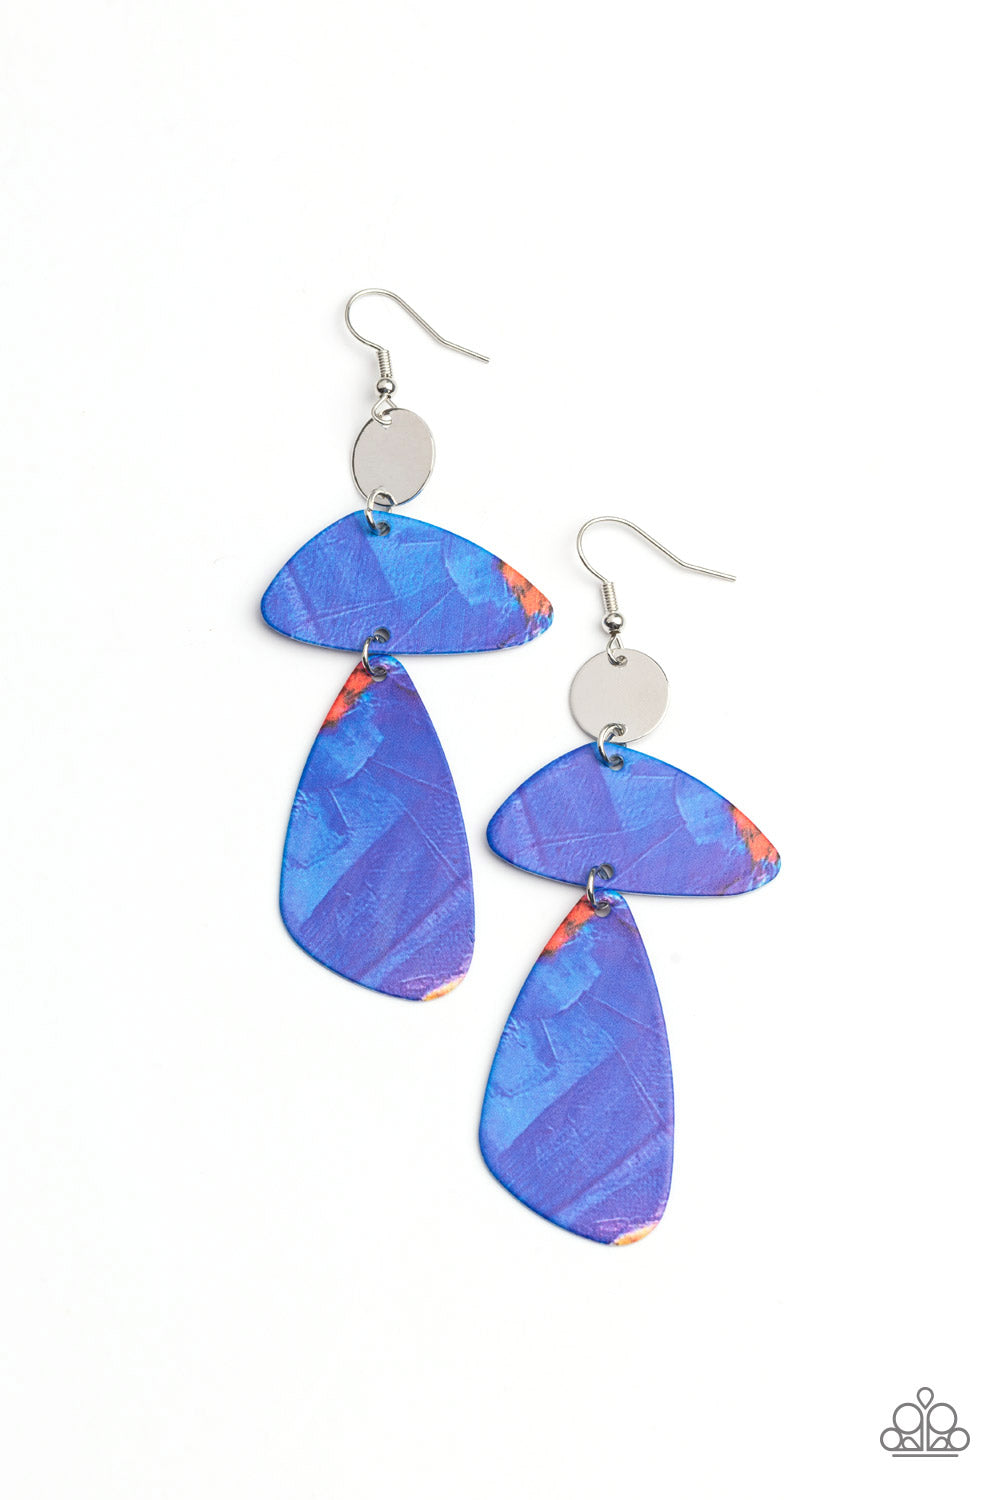 SWATCH Me Now - Blue - Colorful - Silver Earrings - Paparazzi Accessories - Painted in abstract blue details, a pair of asymmetrical frames swing form the bottom of a dainty silver disc for an artsy look. Earring attaches to a standard fishhook fitting.